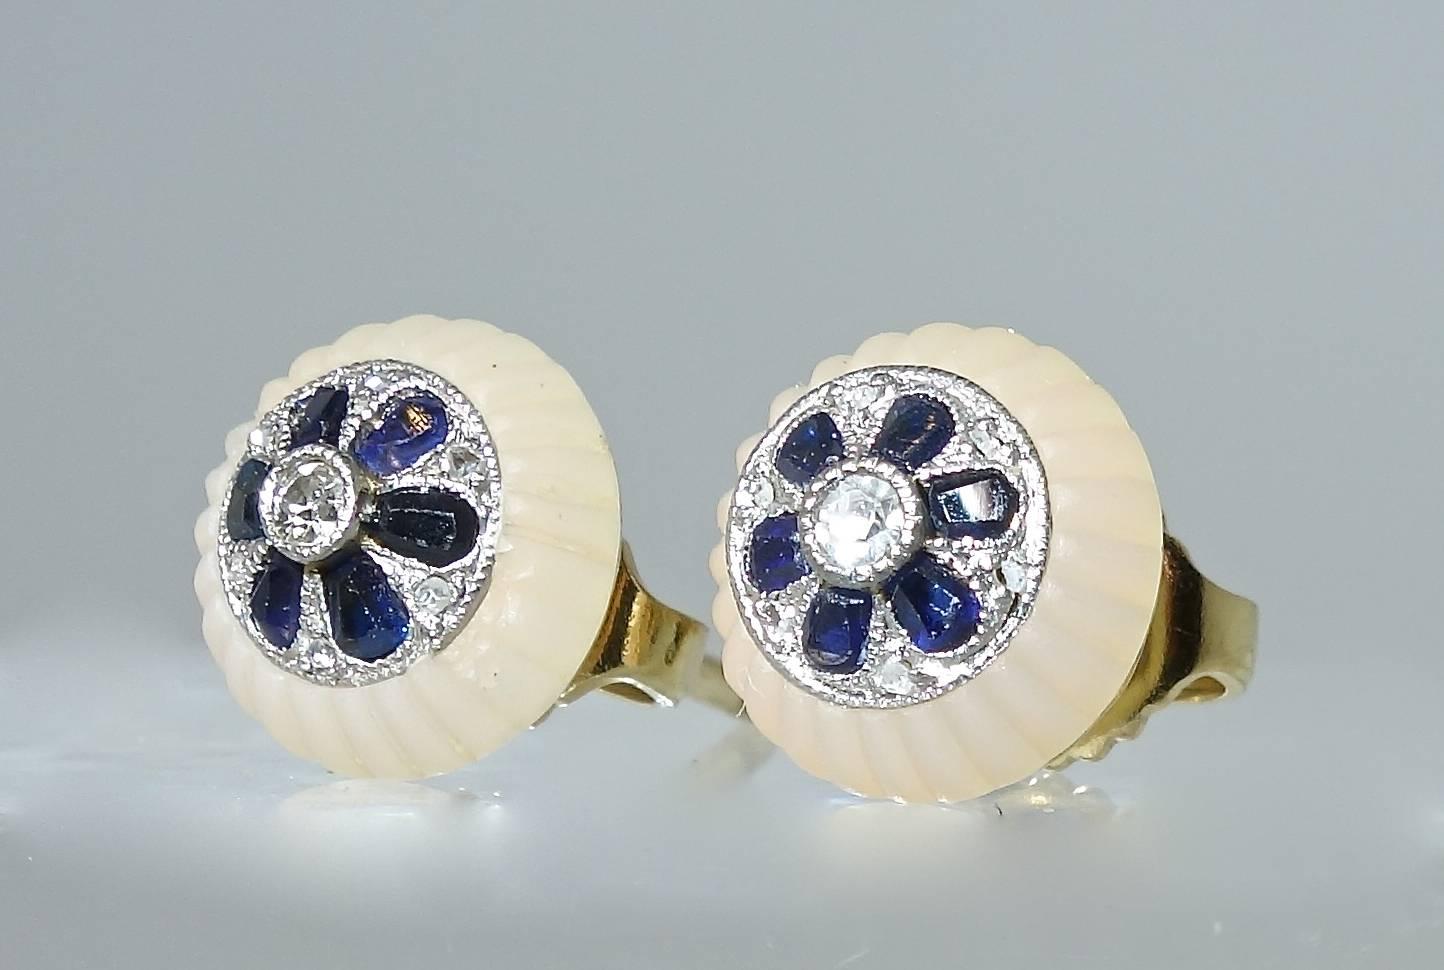 Fluted rock crystal with a platinum (with gold backing) center possessing 12 natural bright blue sapphires with an European cut diamond in the center and small rose cut diamonds set in between all creating a pretty flower motif.  These